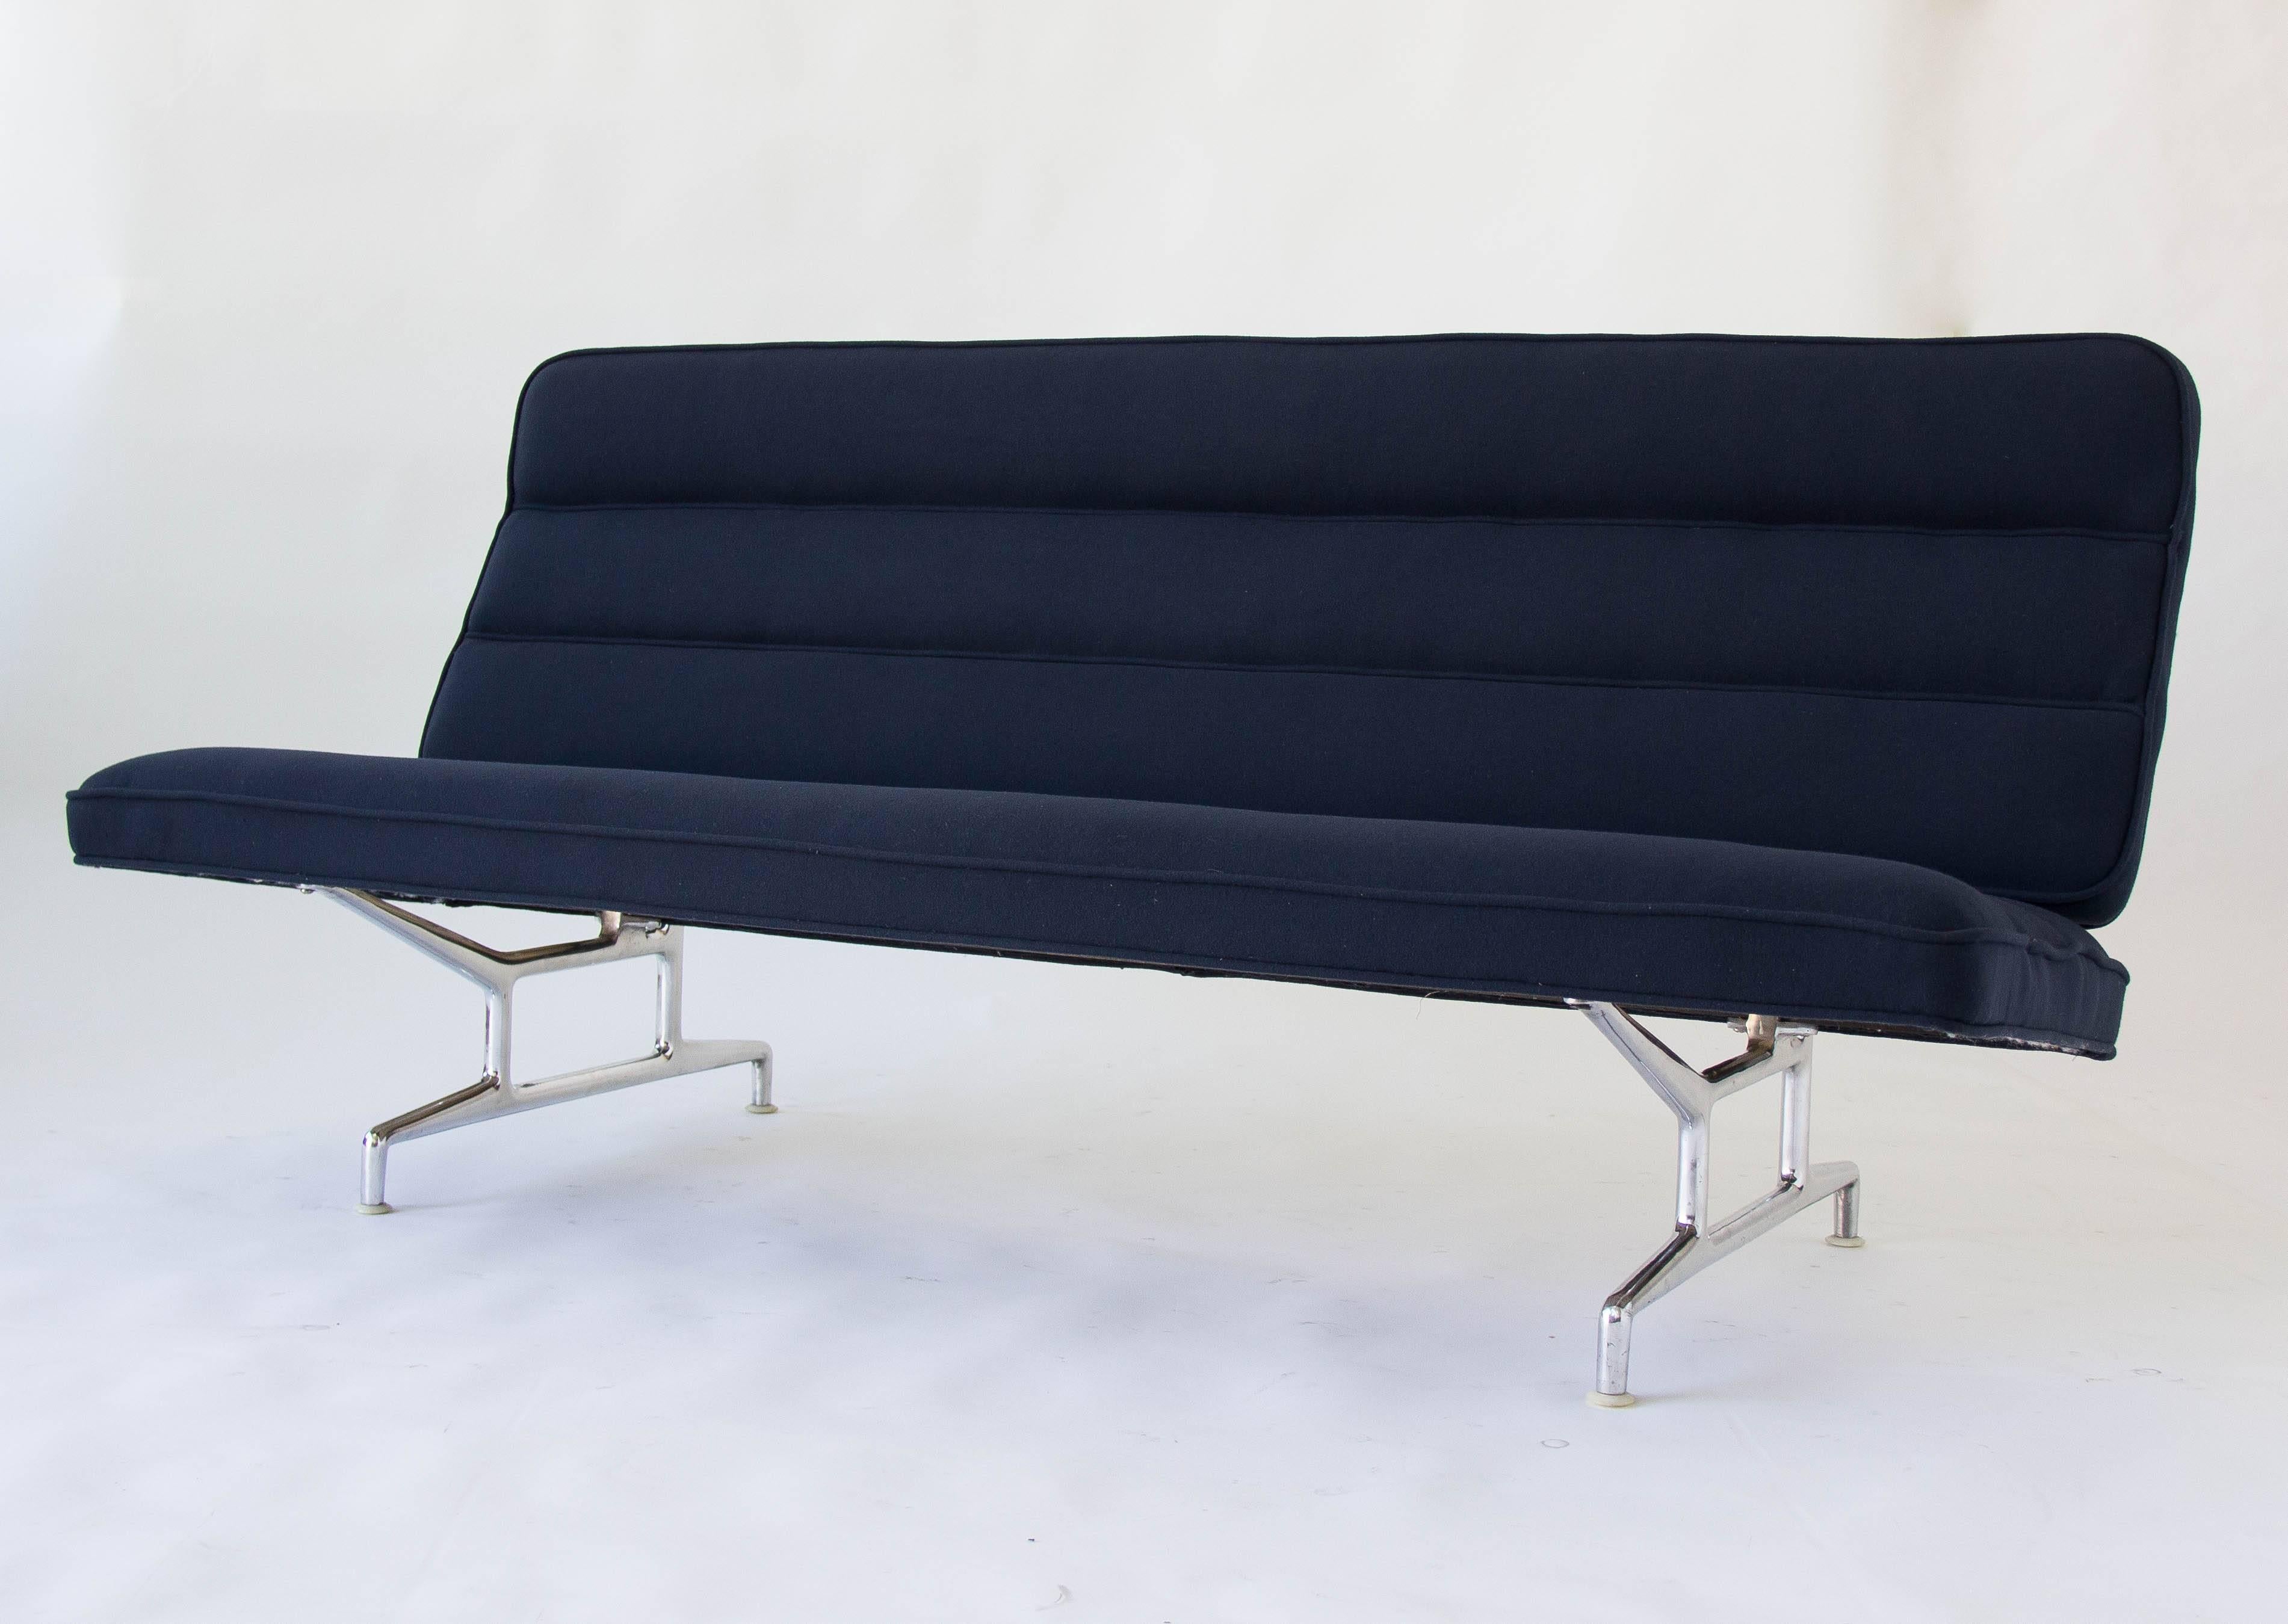 A fully restored 3473 sofa by Charles and Ray Eames for Herman Miller. Upholstered in sumptuous blue Maharam merino or cashmere textile, this minimal sofa has a gently-angled, segmented backrest and seat. The angled seat is supported by two brackets